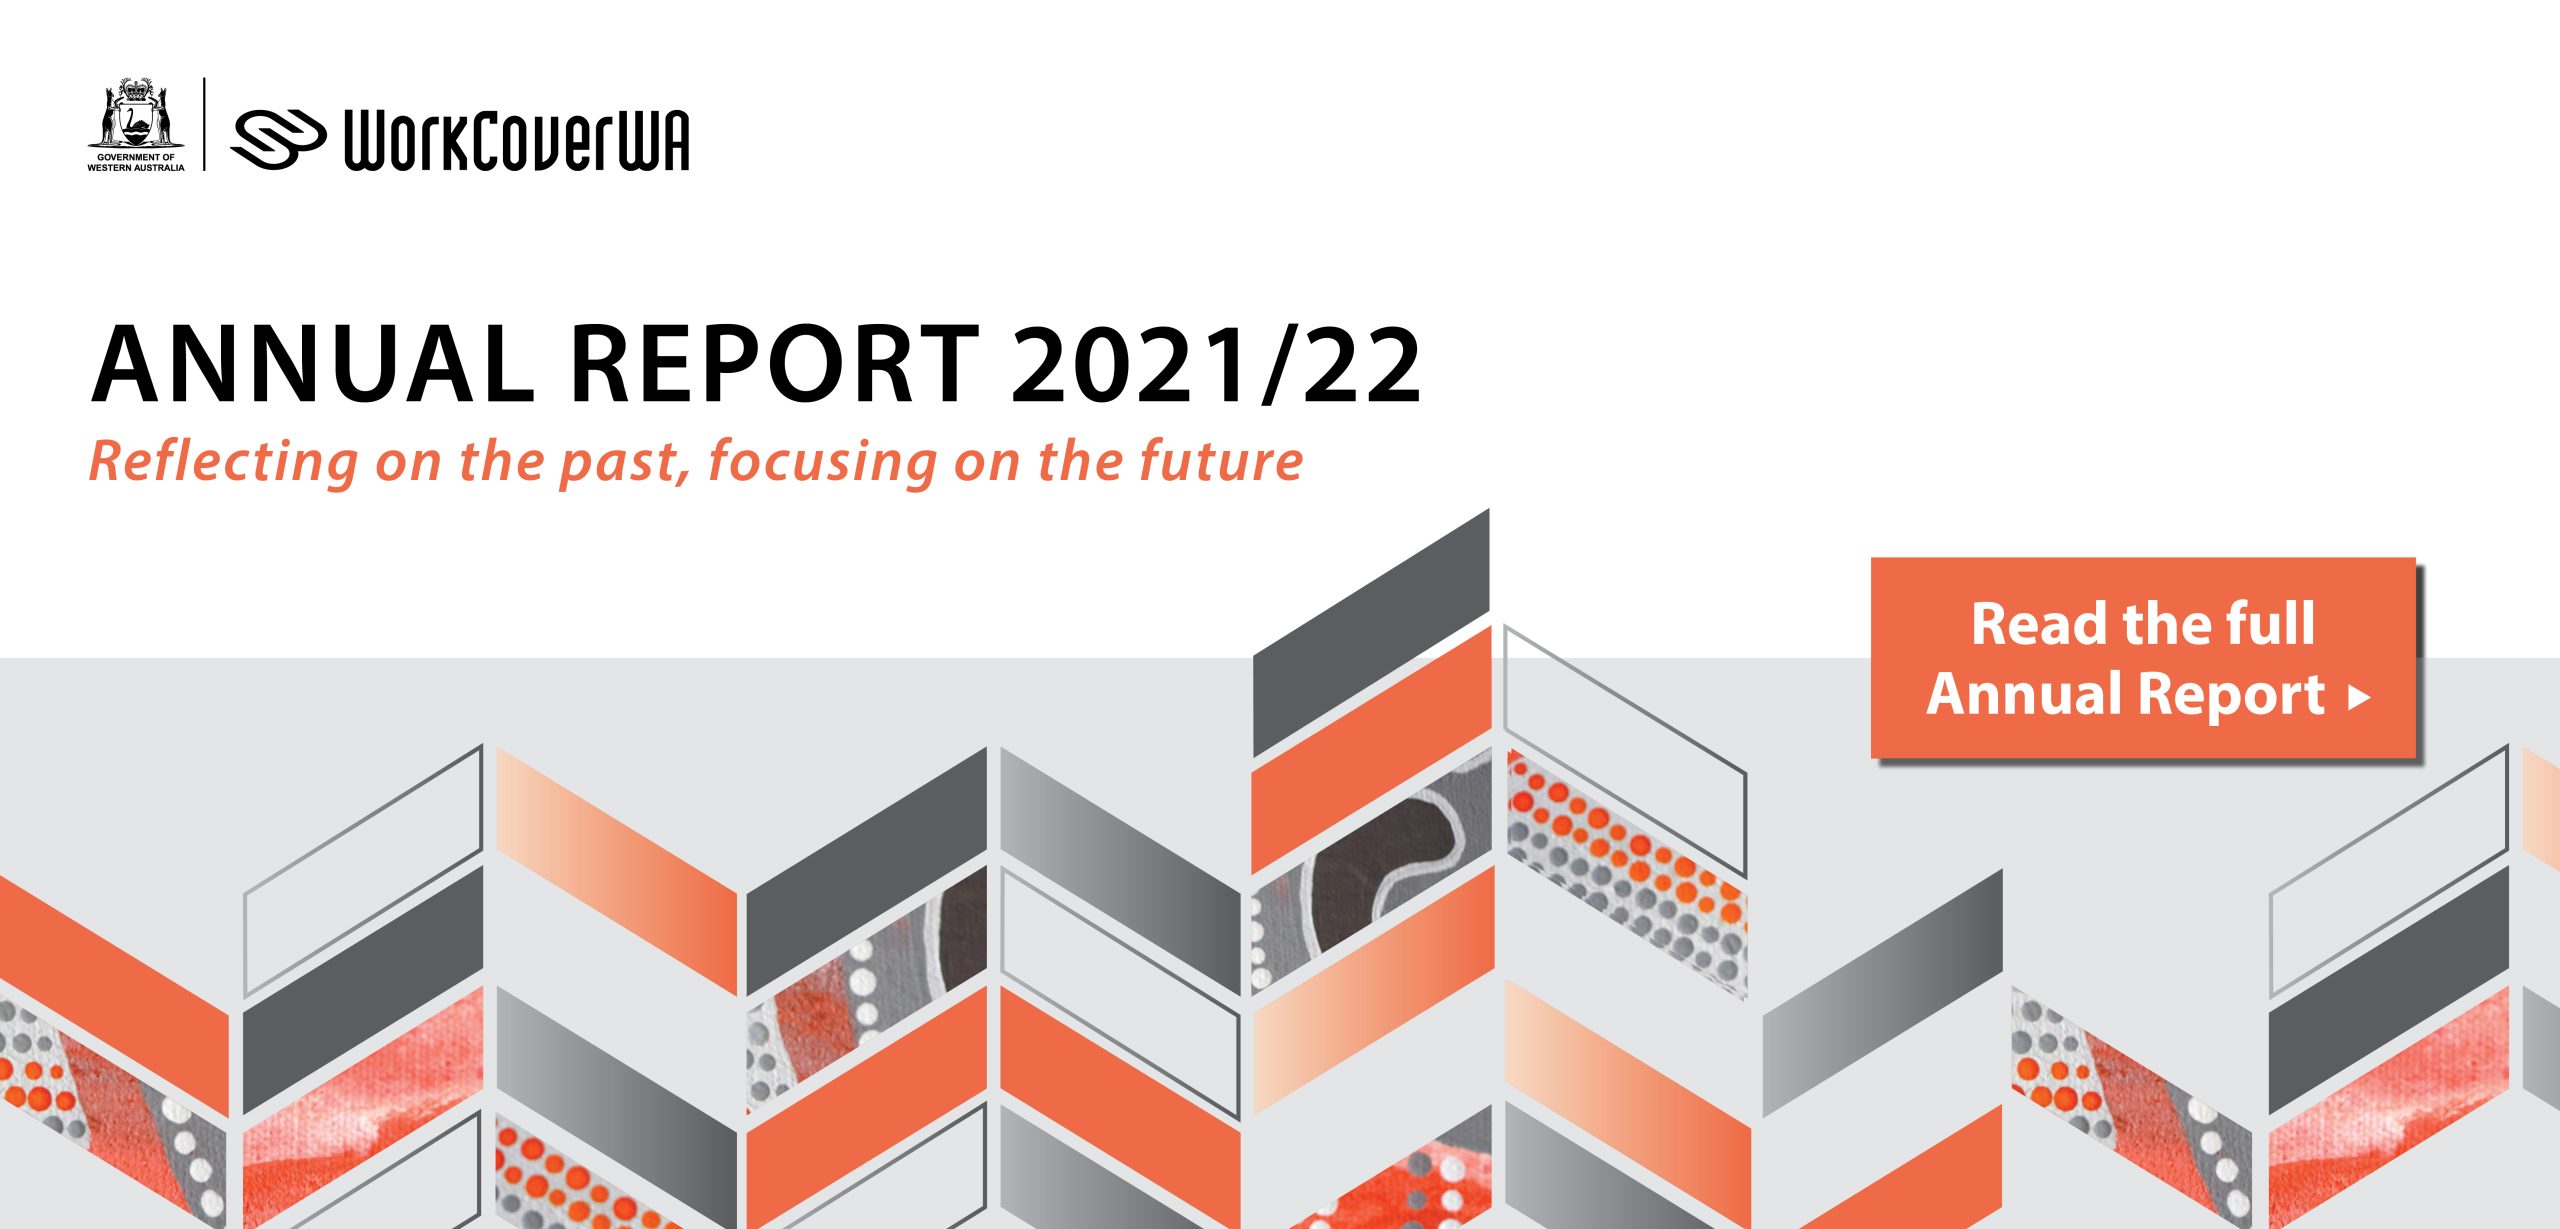 Annual Report 2021/22 is available to read on our website